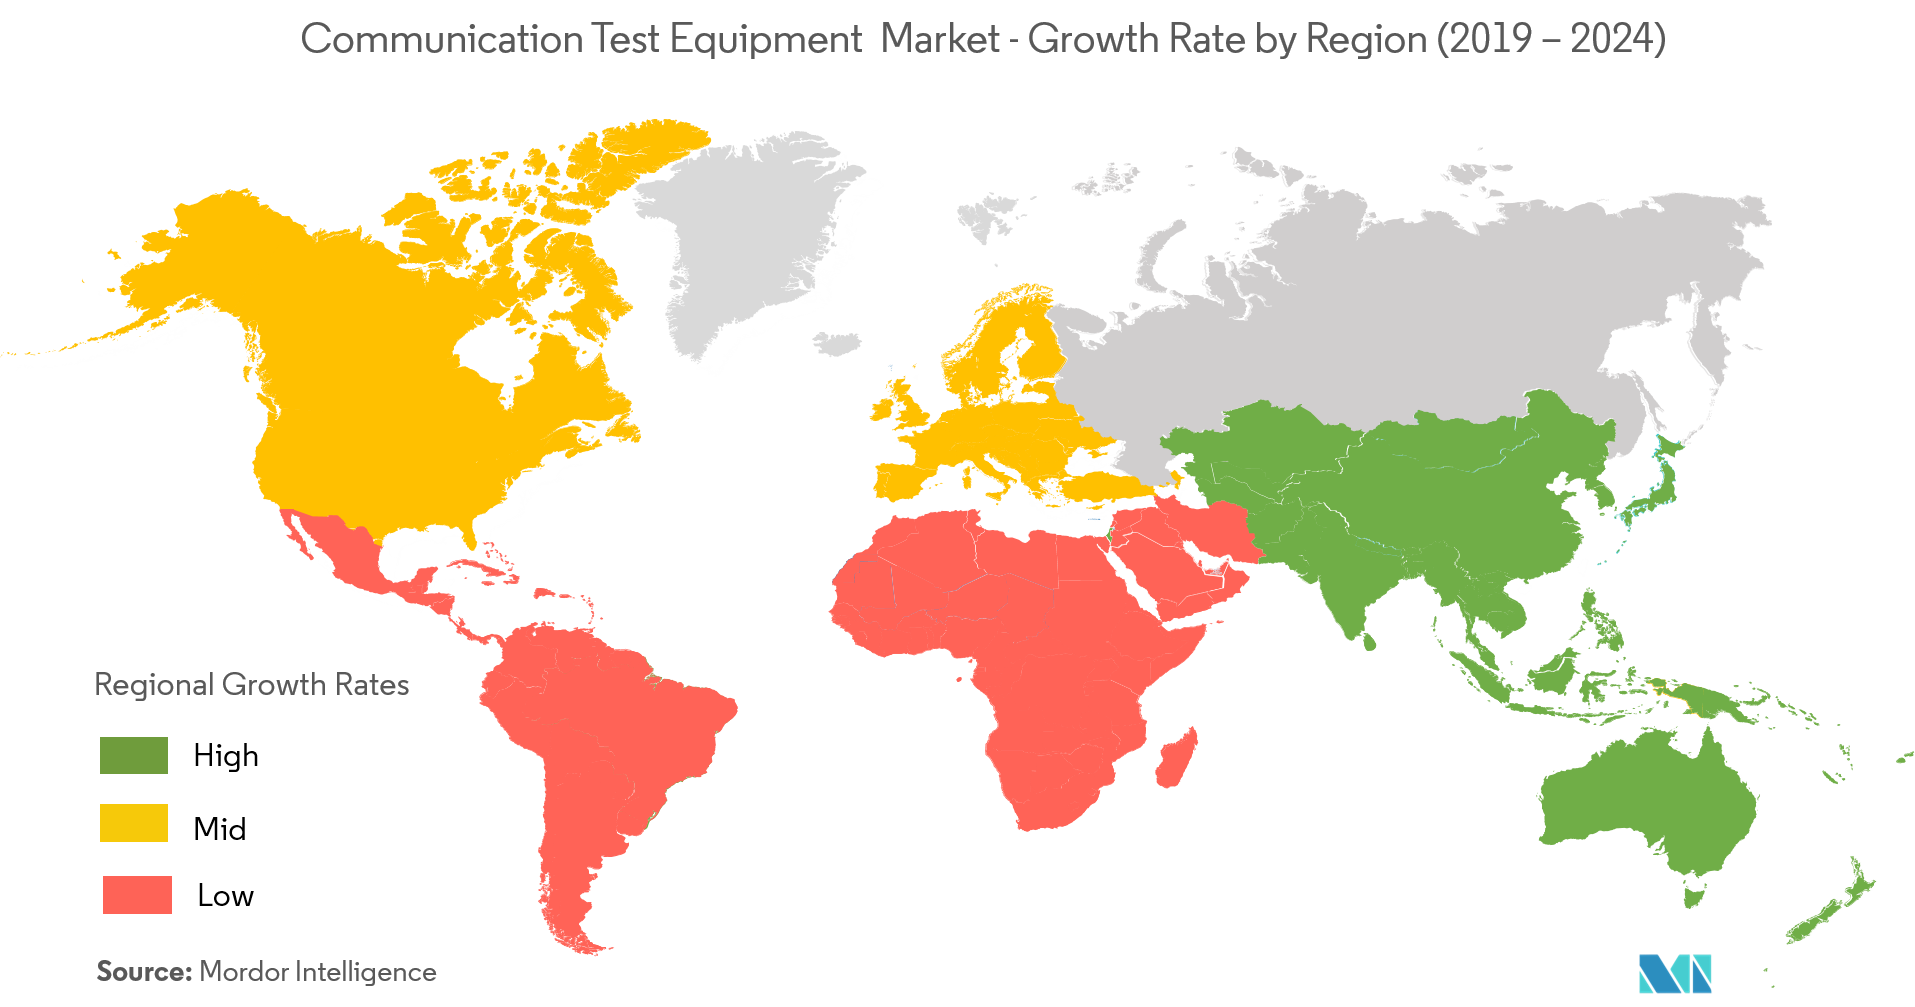 Communication Test Equipment Market- Growth Rate by Region (2019 - 2024)